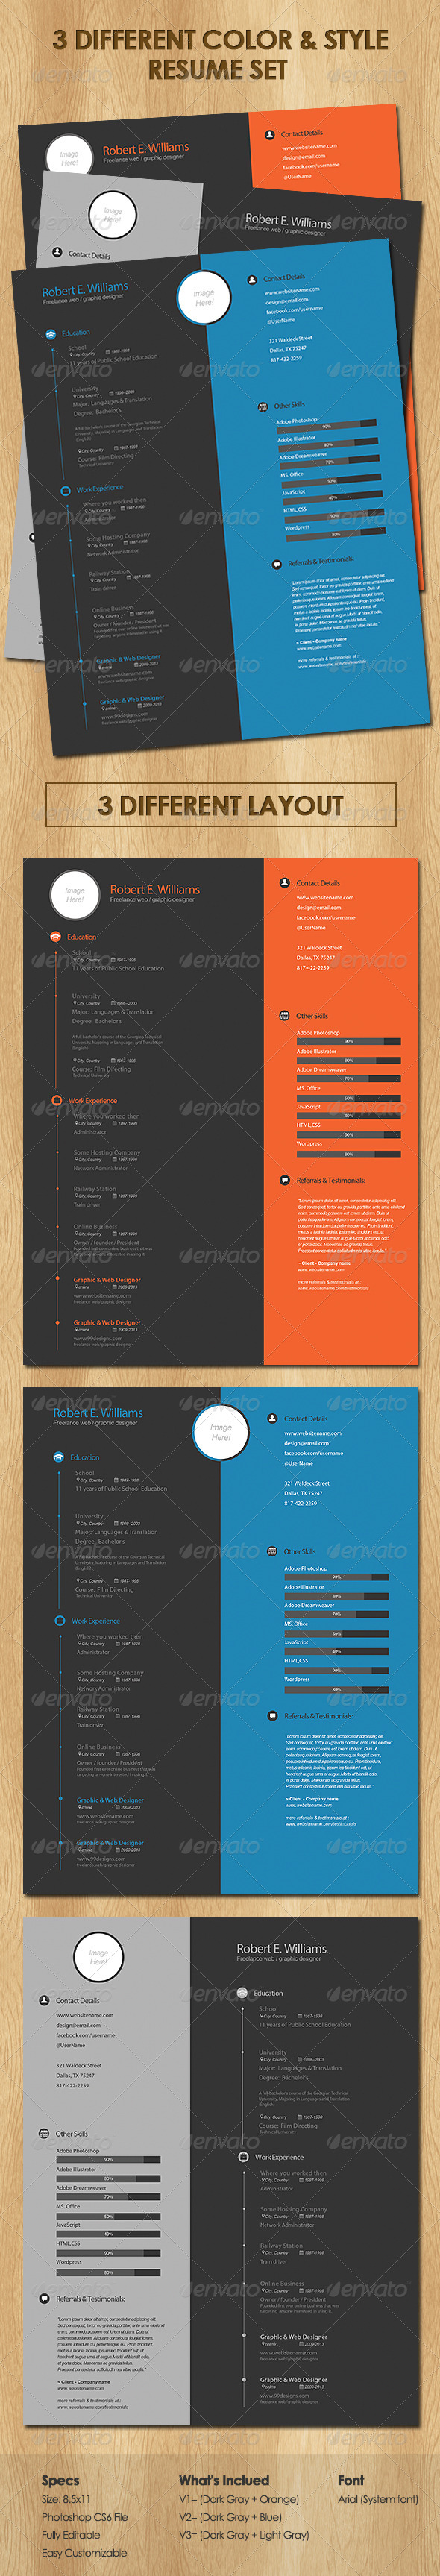 3 Different Color & Style Resume Set